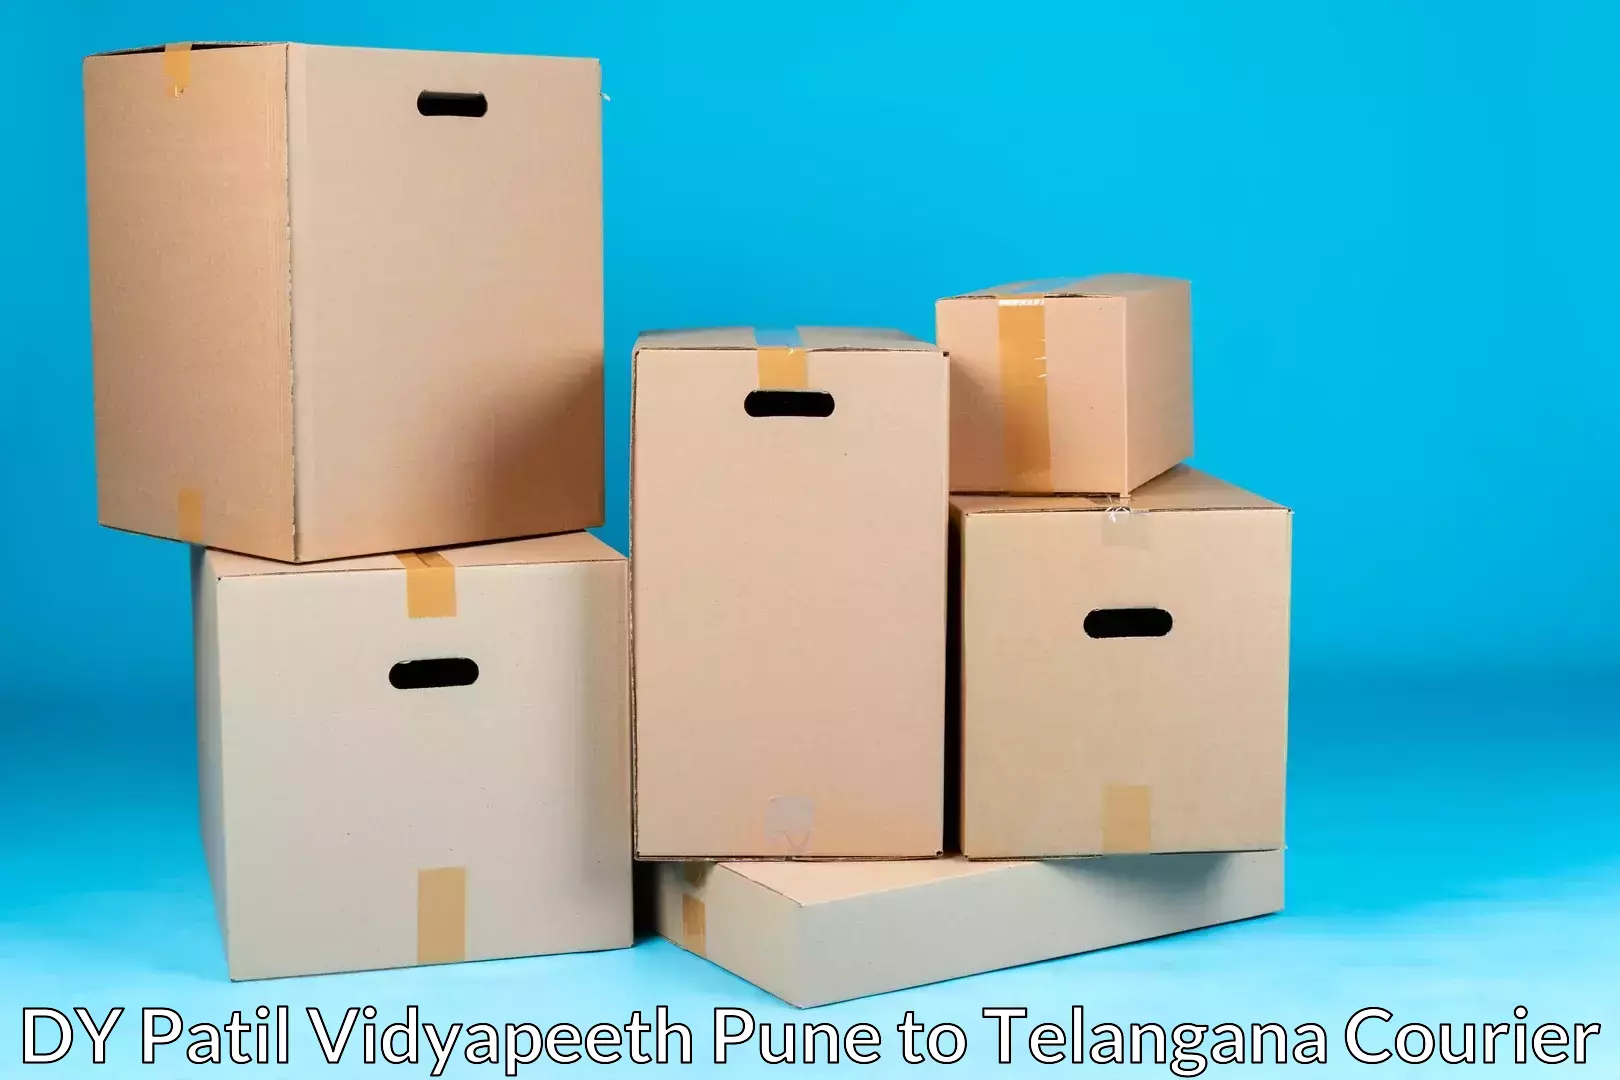 Residential moving experts DY Patil Vidyapeeth Pune to Telangana